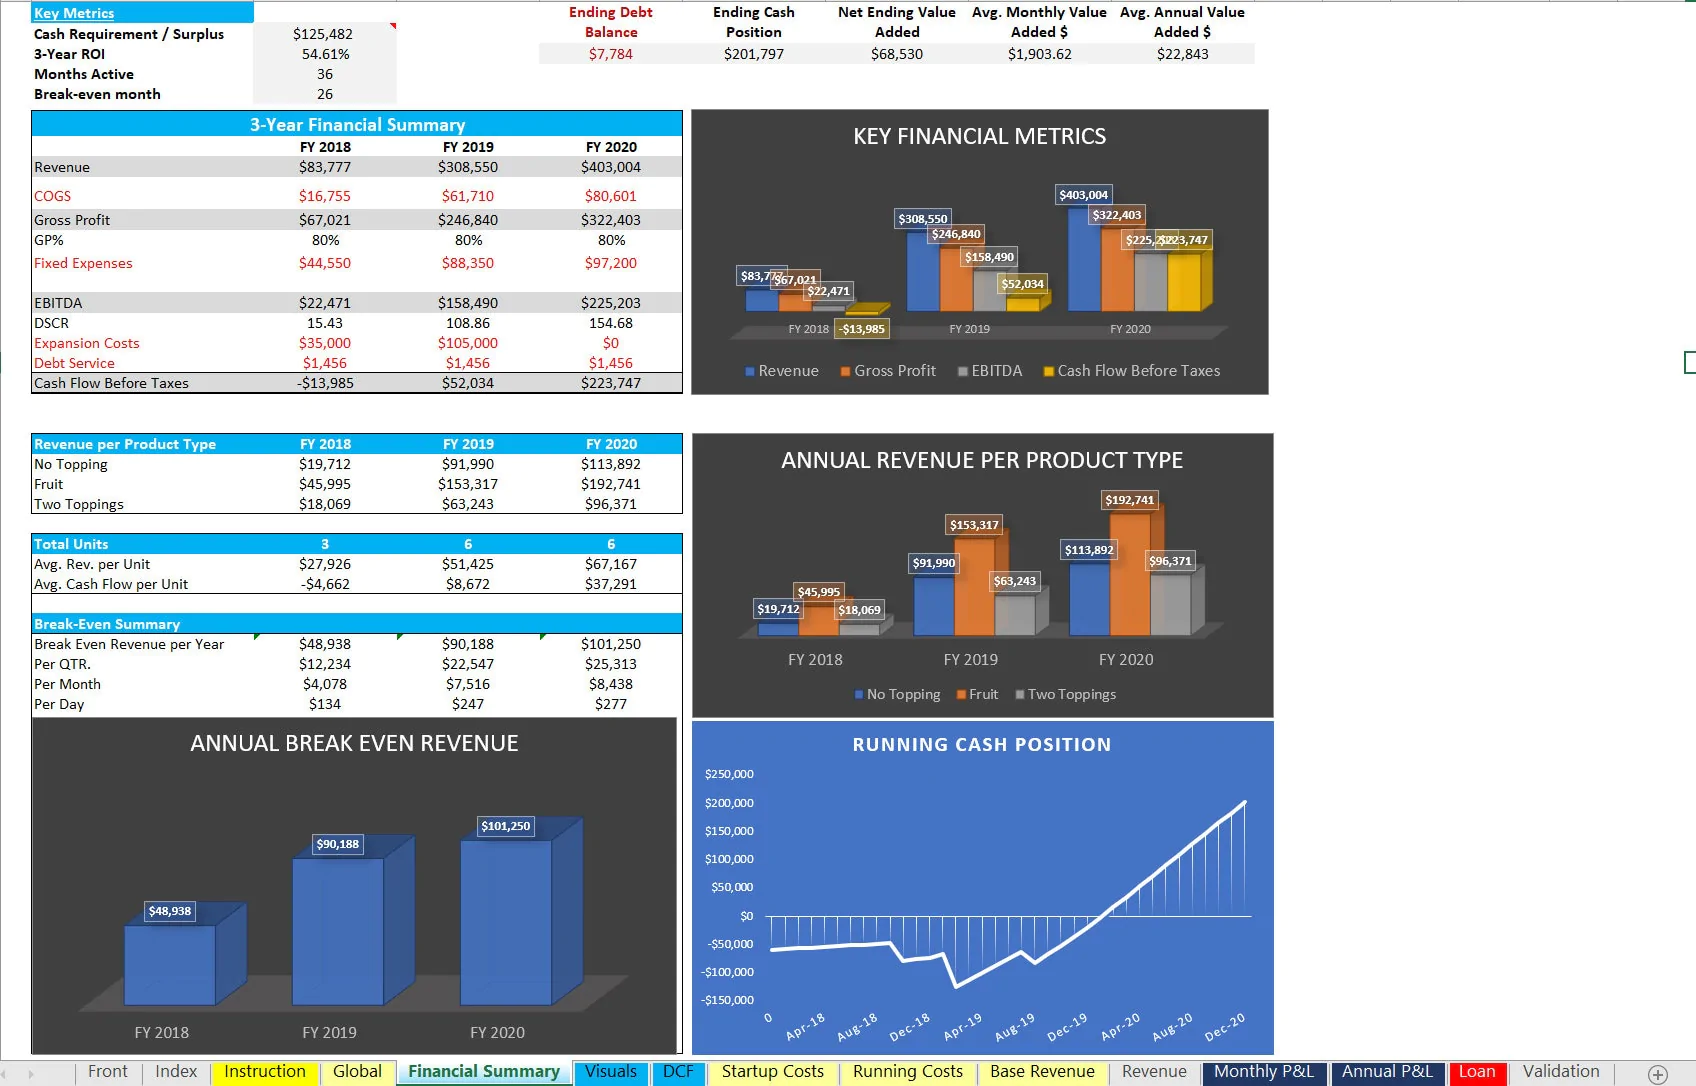 This is a partial preview of Robotic Kiosk Scalable Financial Model (Excel workbook (XLSX)). 